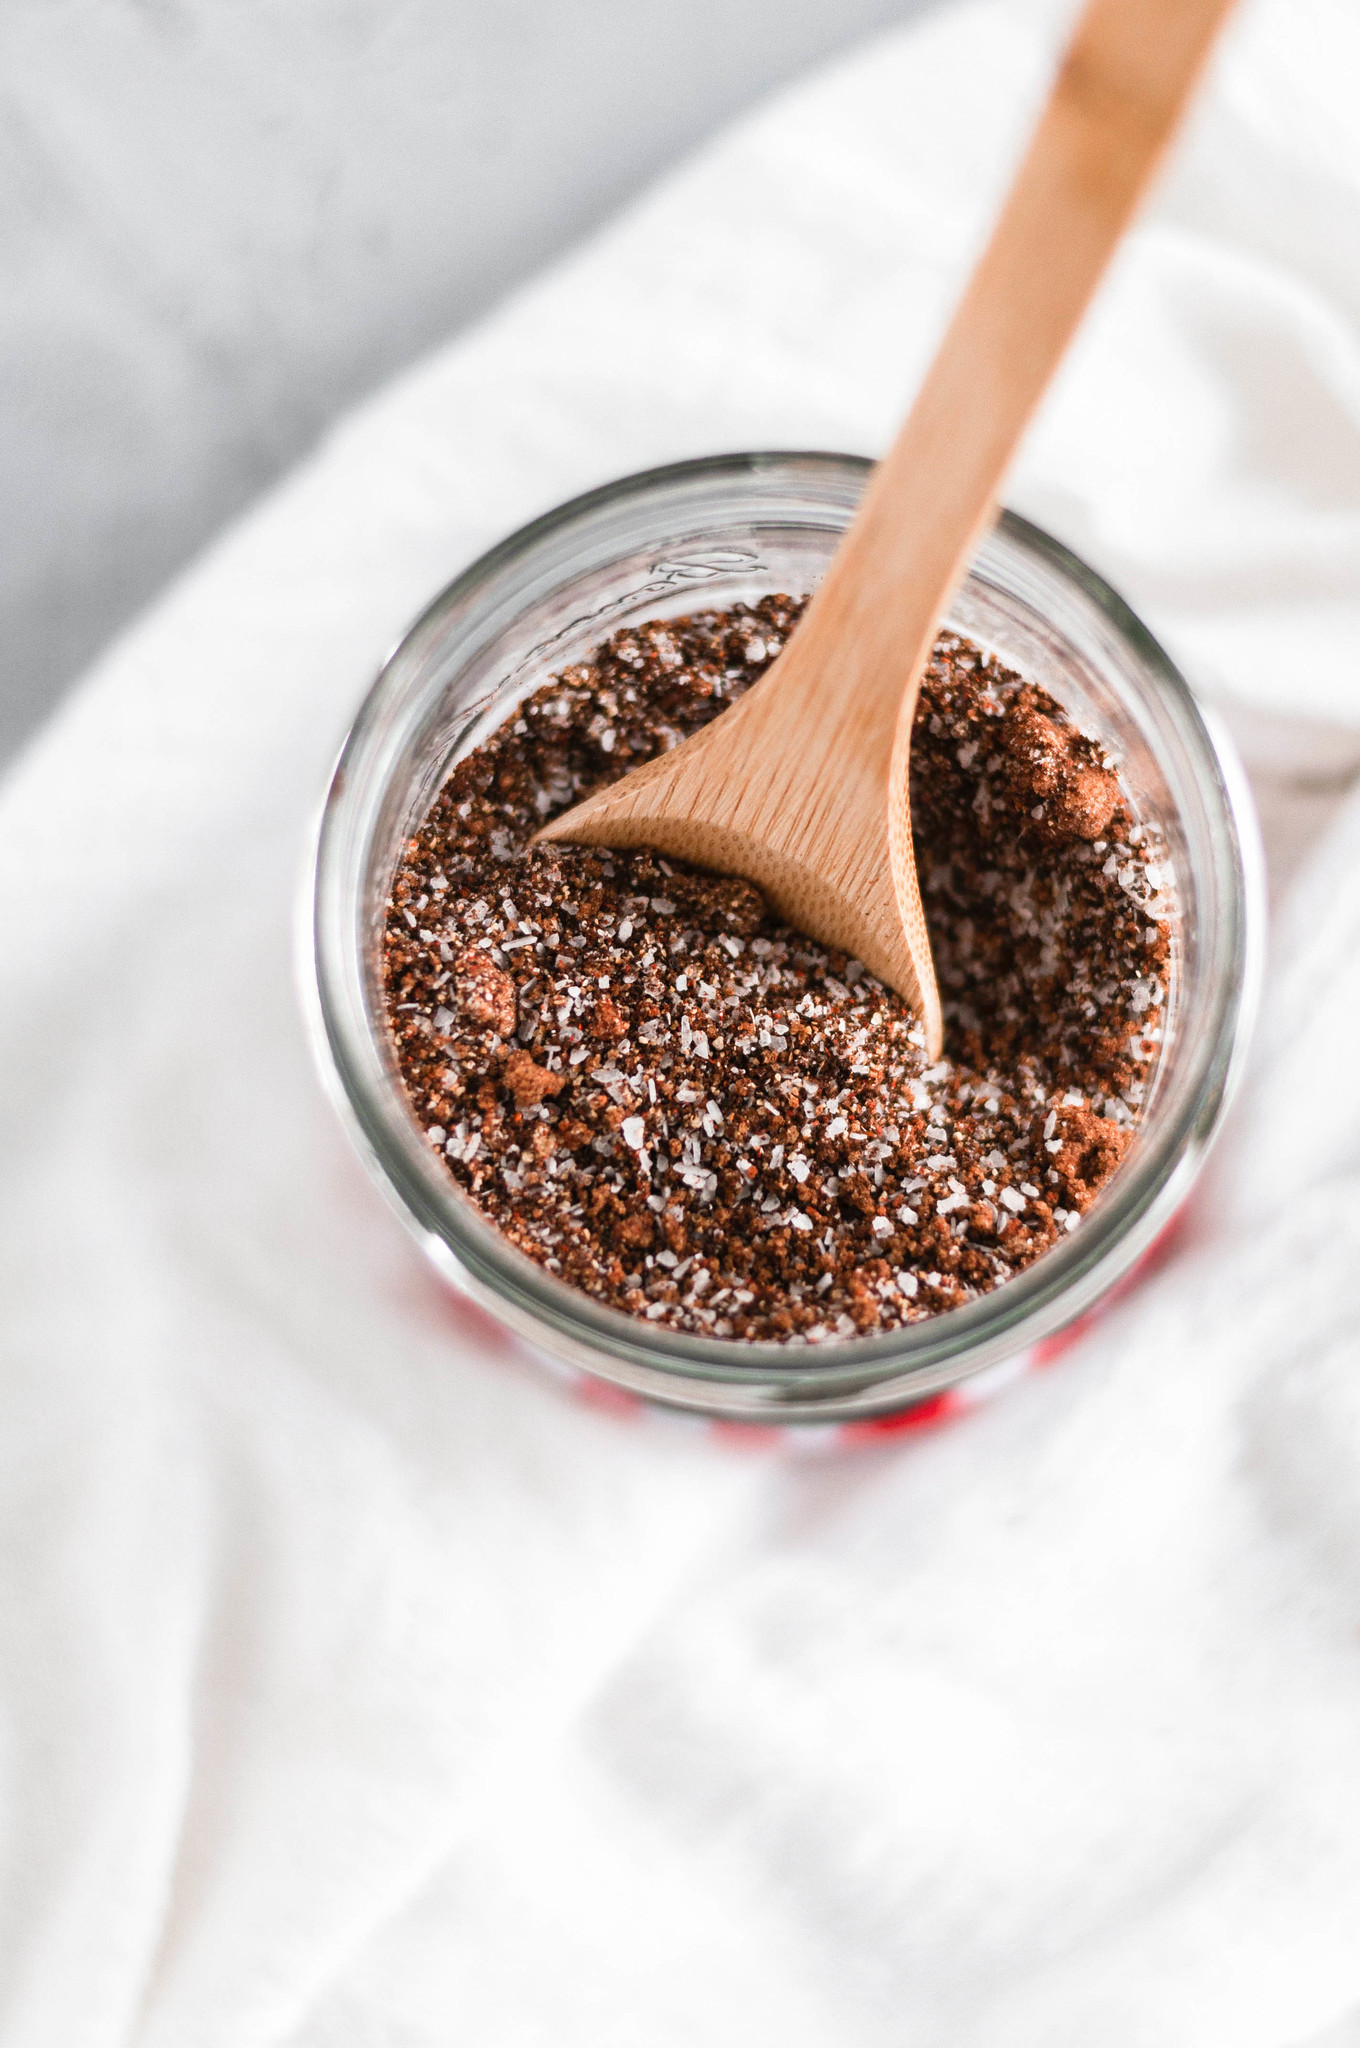 Ditch the store-bought spice blends and make your own at home. This homemade Coffee Rub adds incredible richness and flavor to beef, pork and veggies.